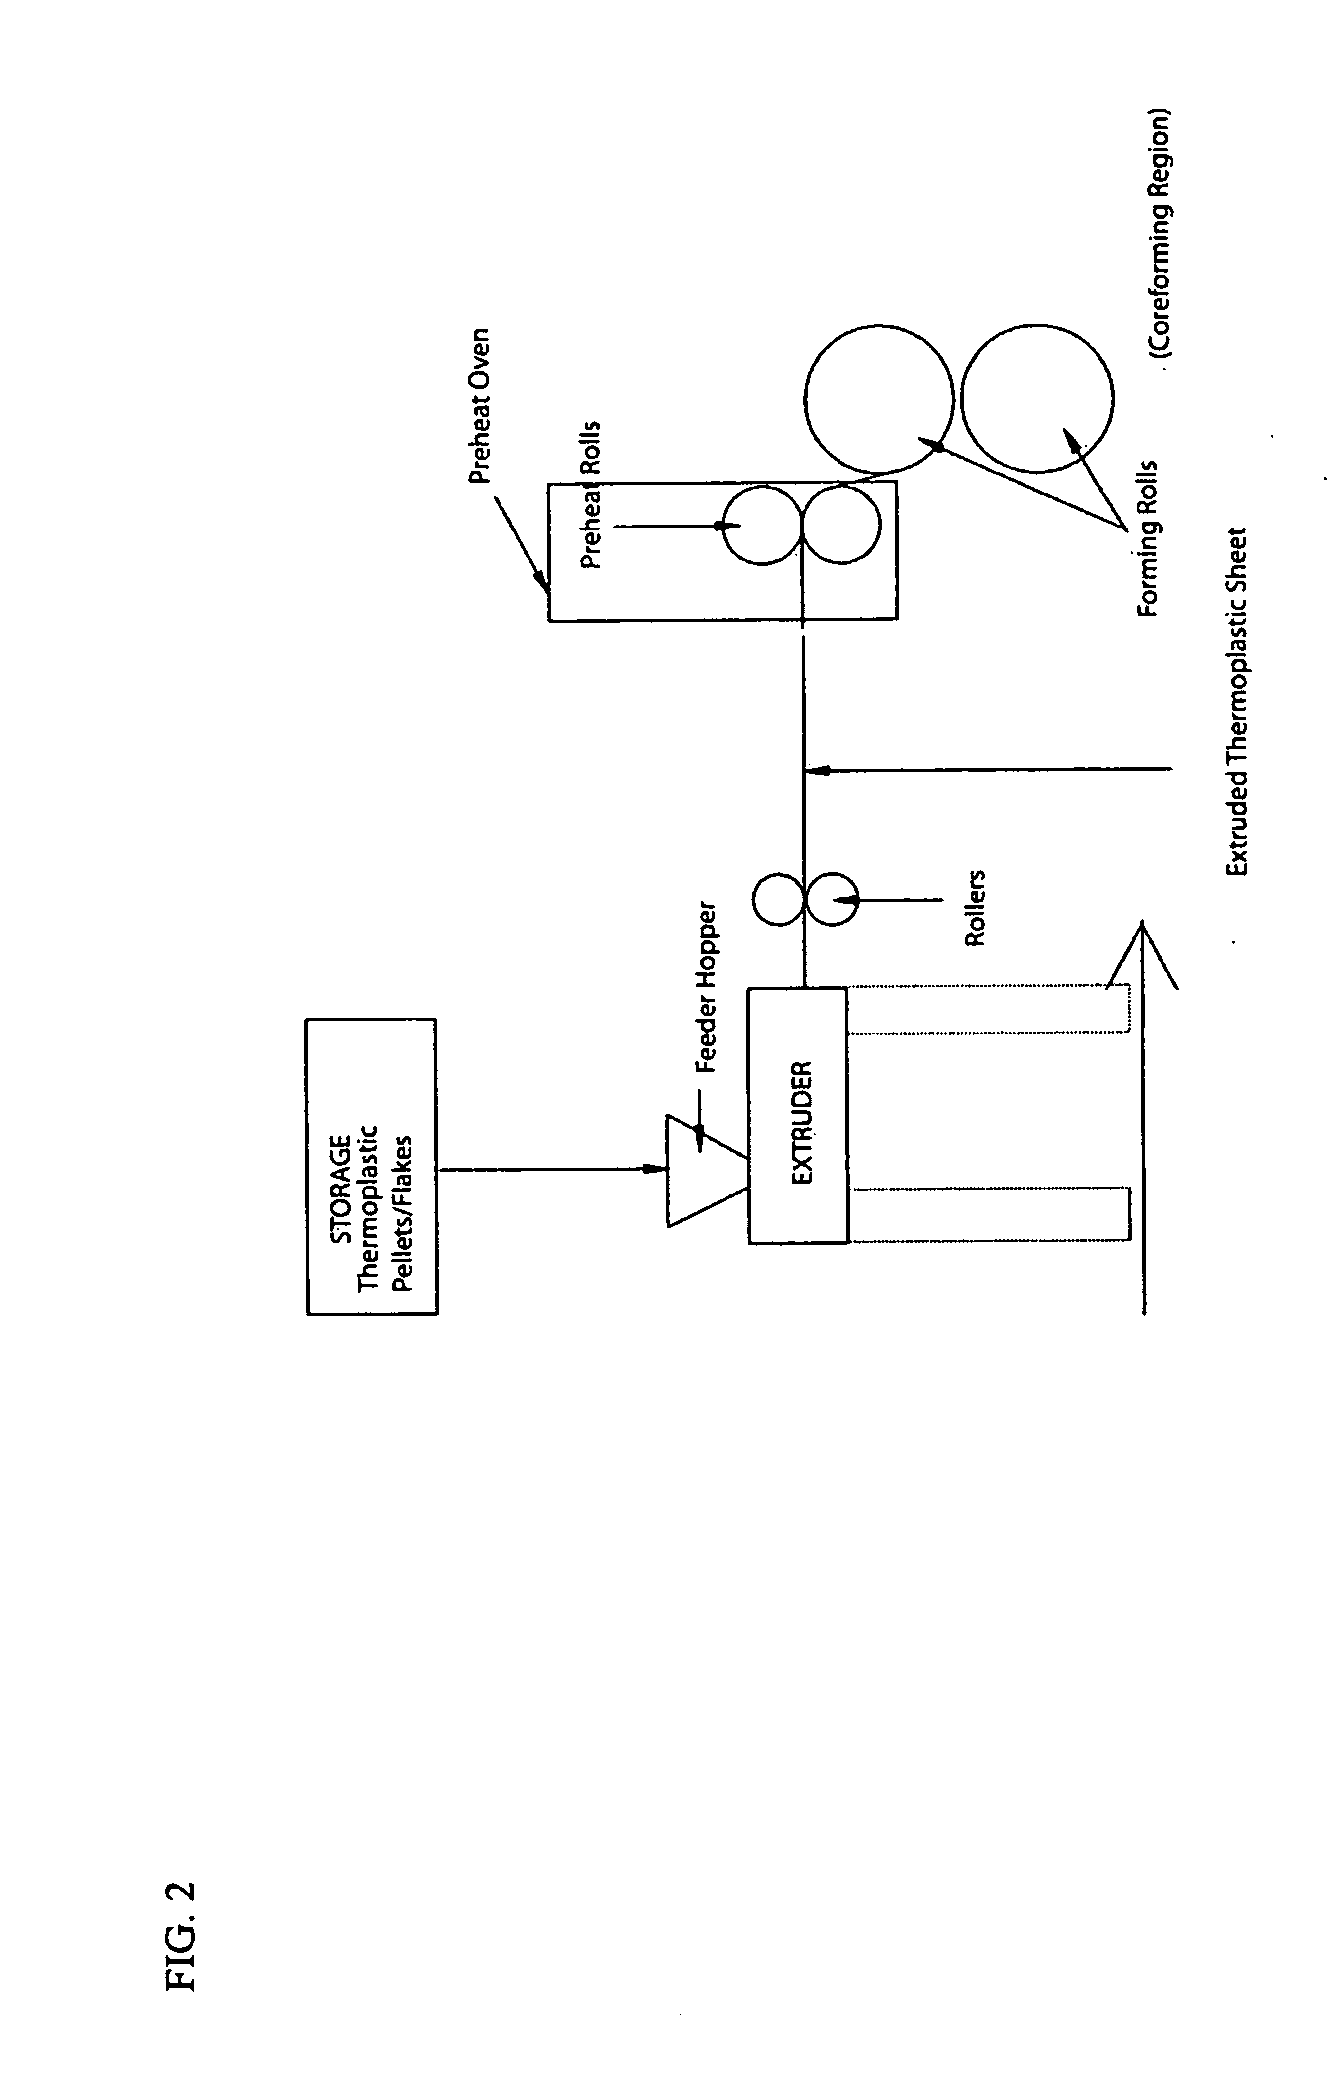 Advanced method and apparatus for cost-effectively and continuously producing expanded thermoformable honeycomb materials